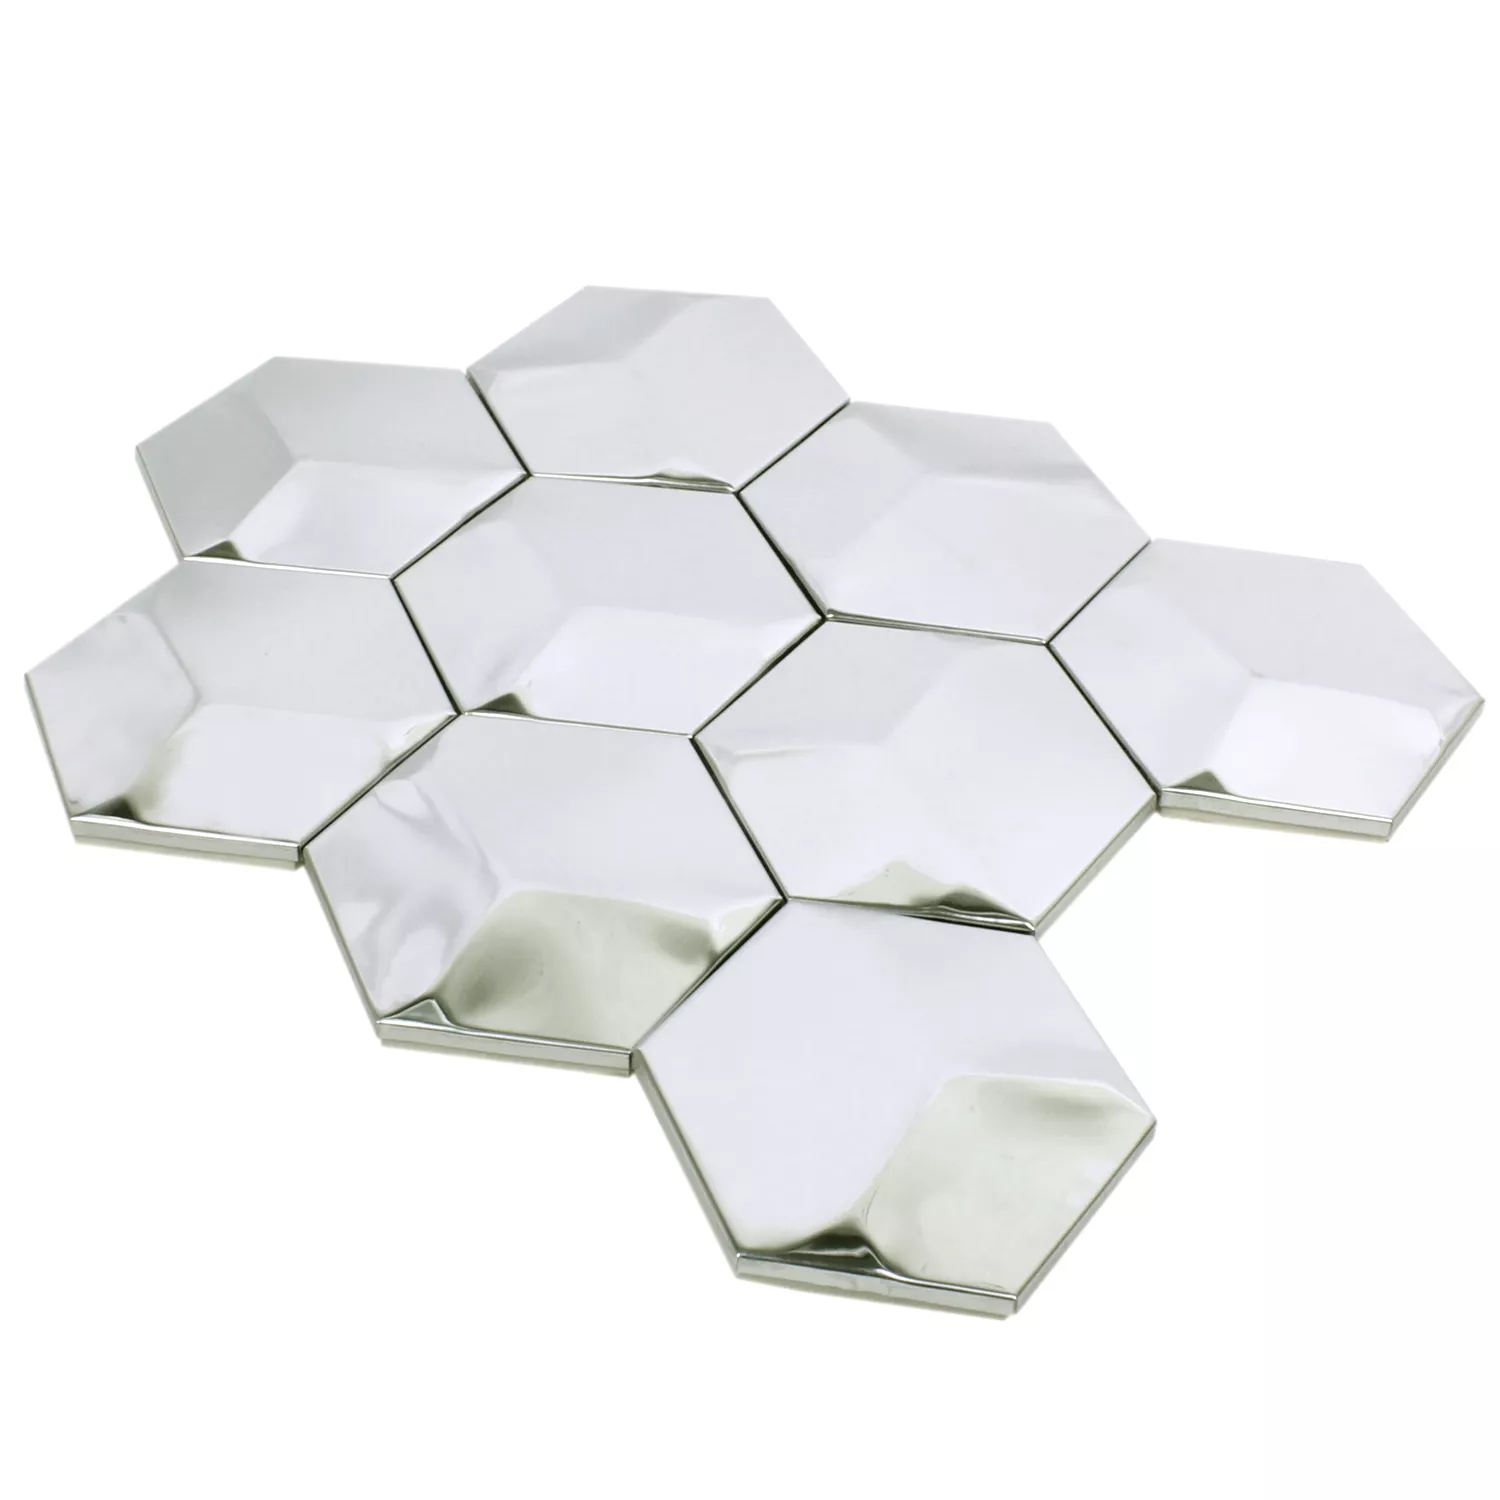 Mosaic Tiles Stainless Steel Contender Hexagon Glossy